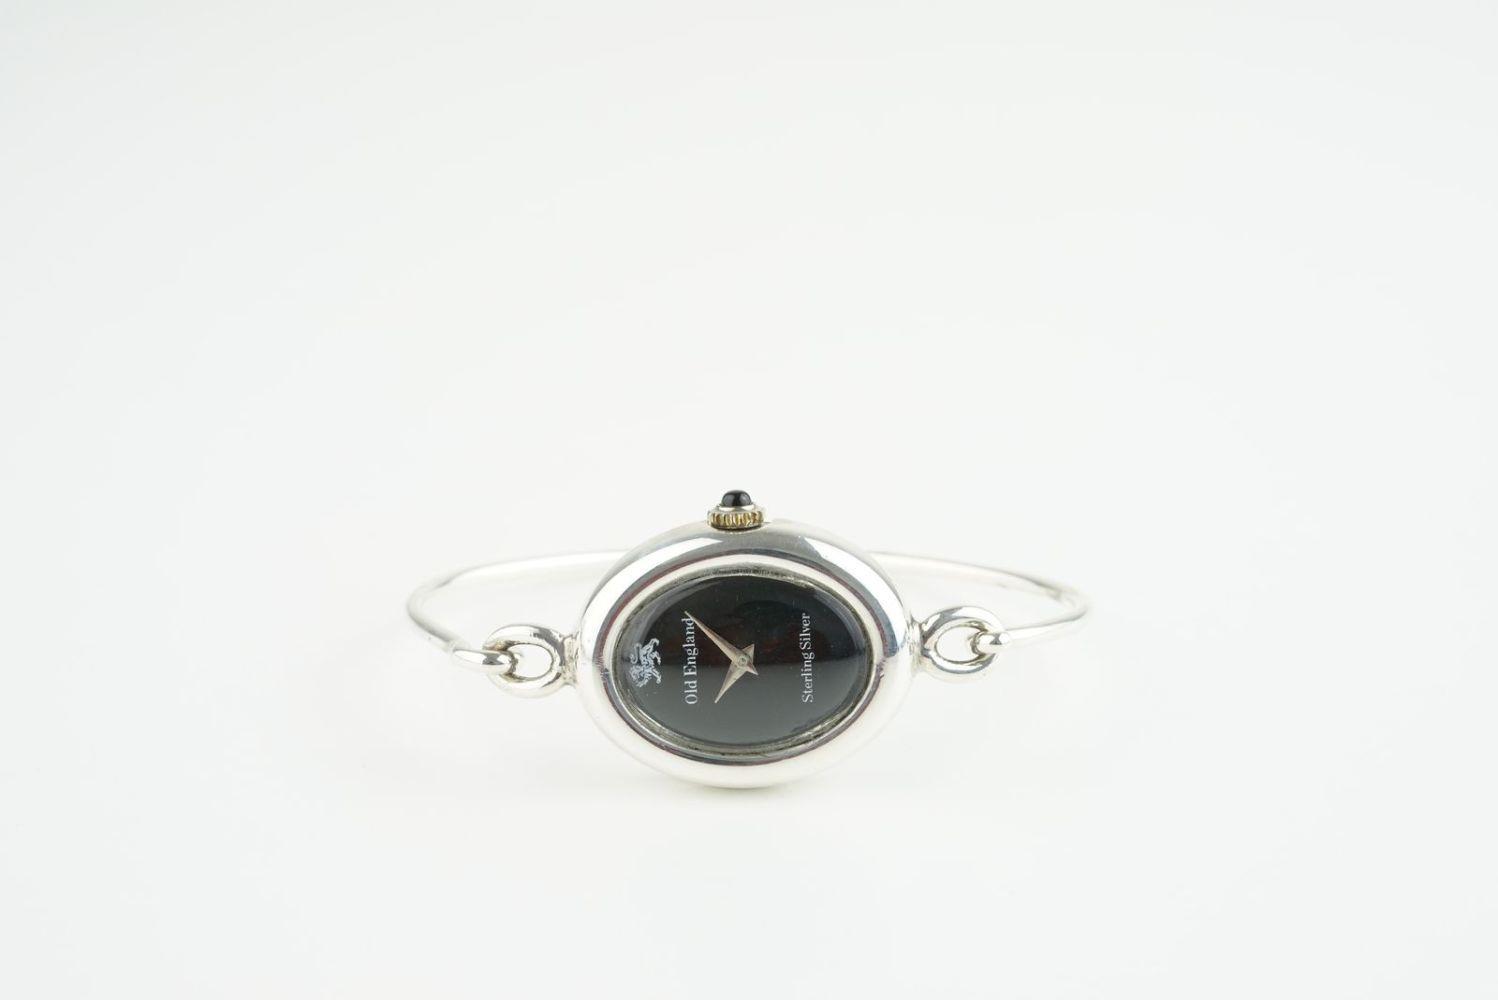 LADIES OLD ENGLAND STERLING SILVER WRISTWATCH, oval black dial with no hour markers and dauphine